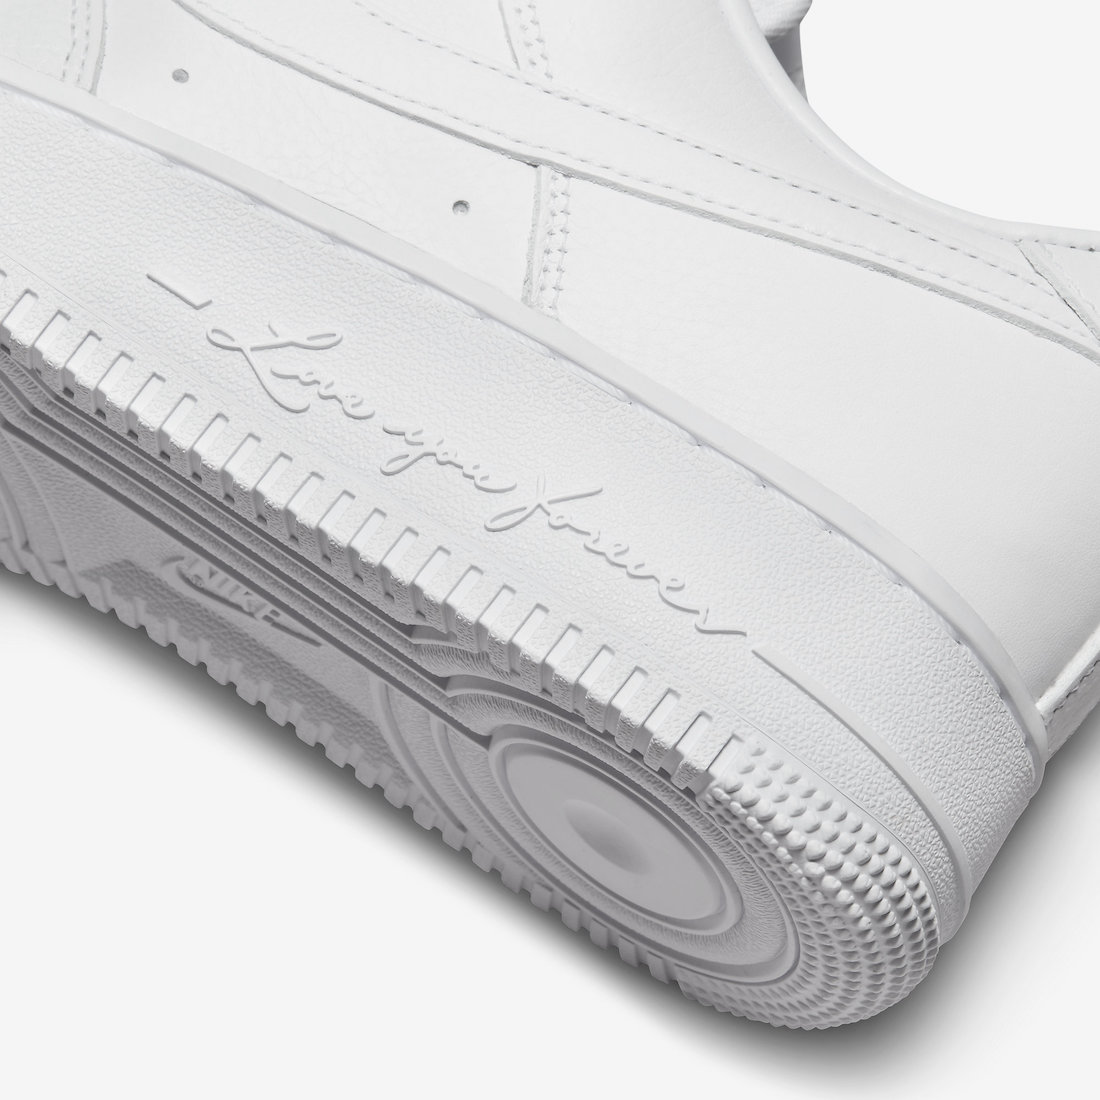 Drake NOCTA Nike Air Force 1 Low White CZ8065-100 Release Date